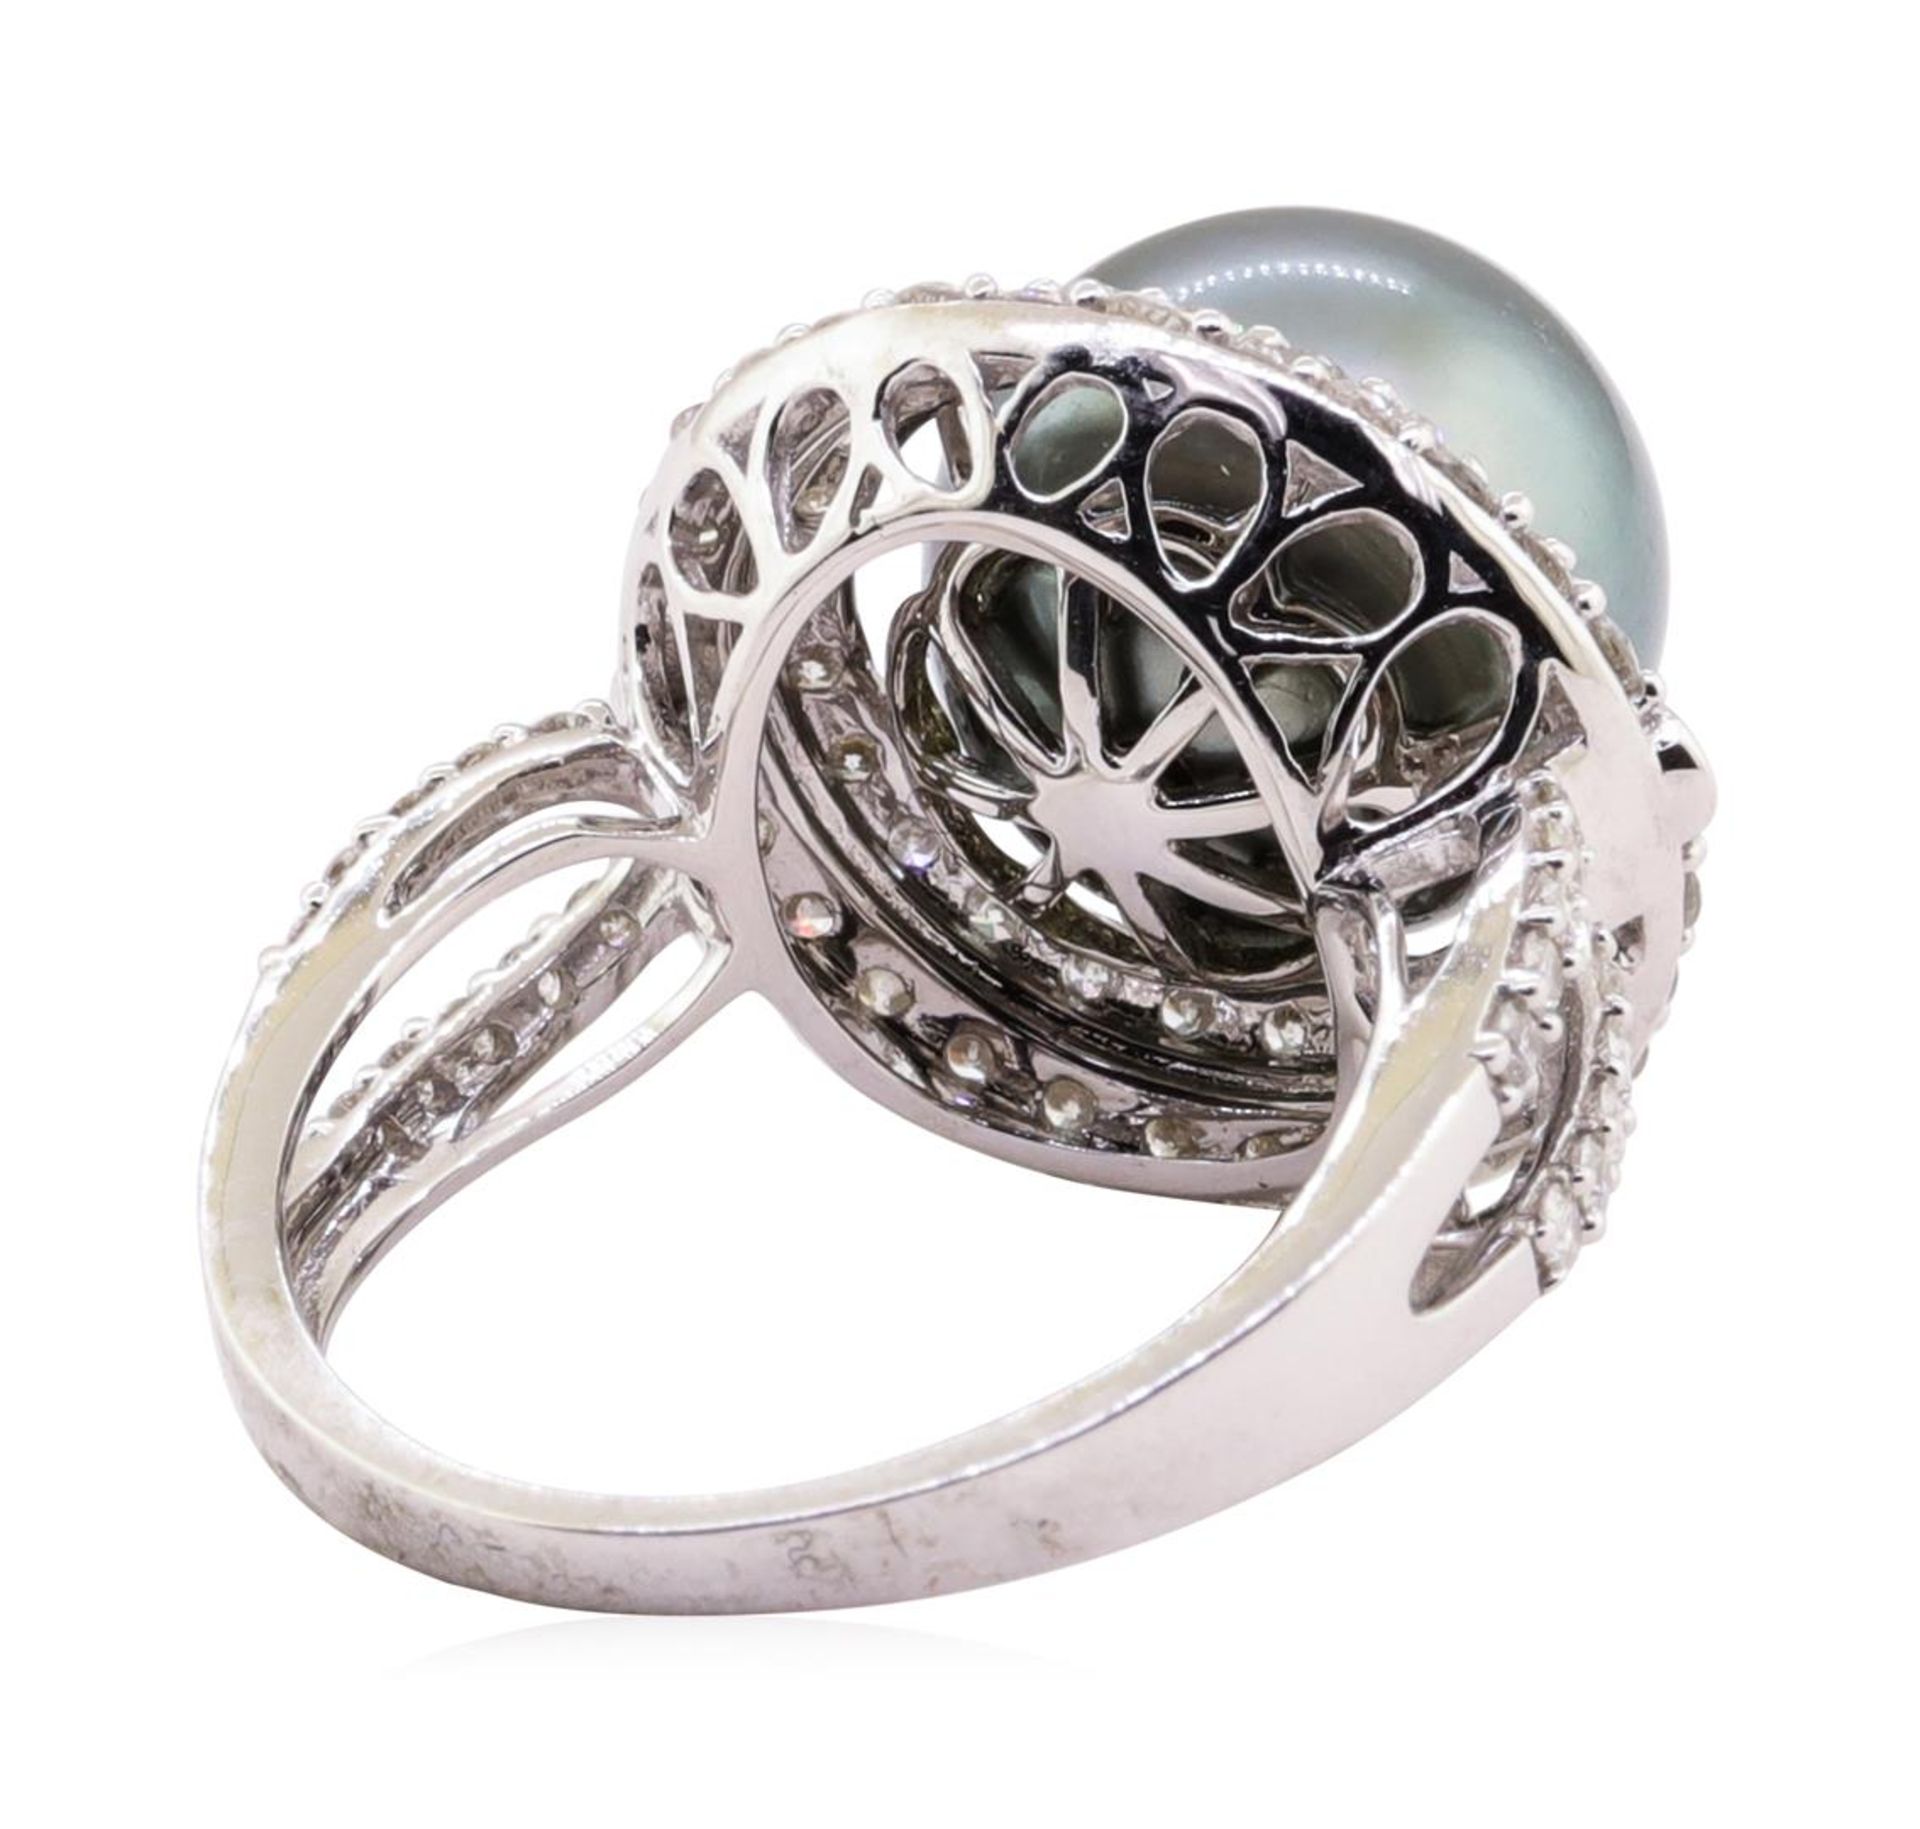 Tahitian Pearl and Diamond Ring - 18KT White Gold - Image 3 of 5